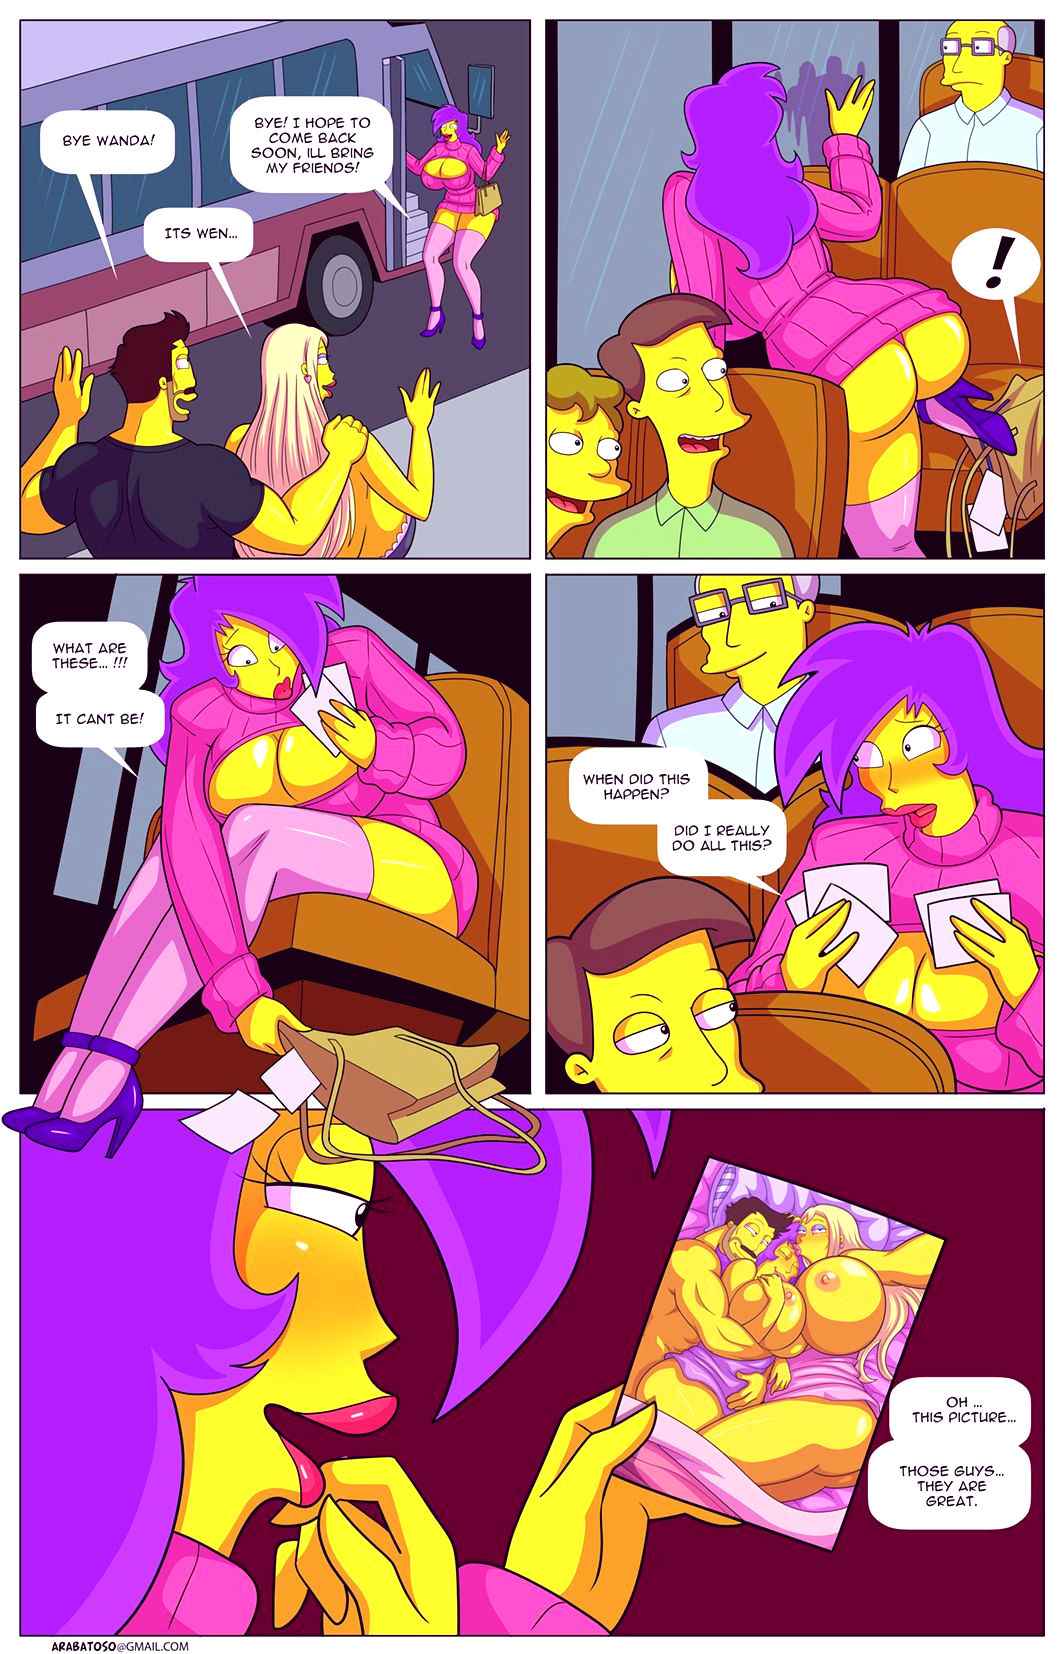 Darrens adventure or welcome to springfield porn comic picture 72